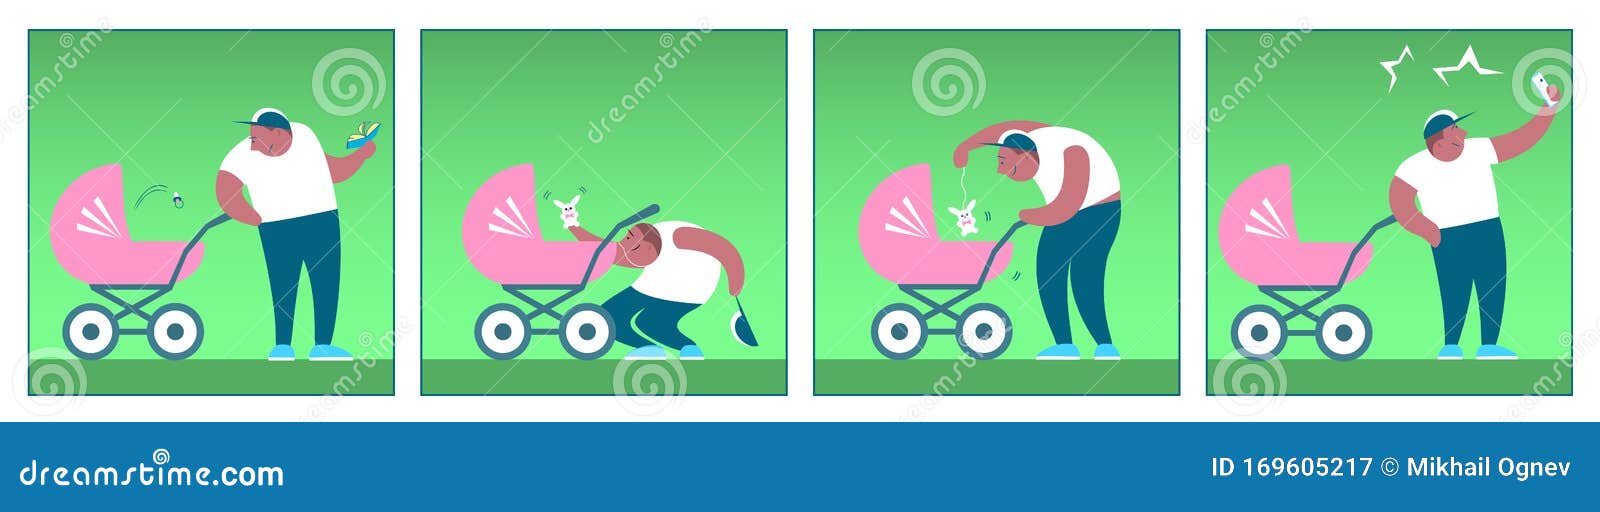 Comic without Words in Four Pictures about a Funny Father with a Pram Stock  Vector - Illustration of comic, parent: 169605217